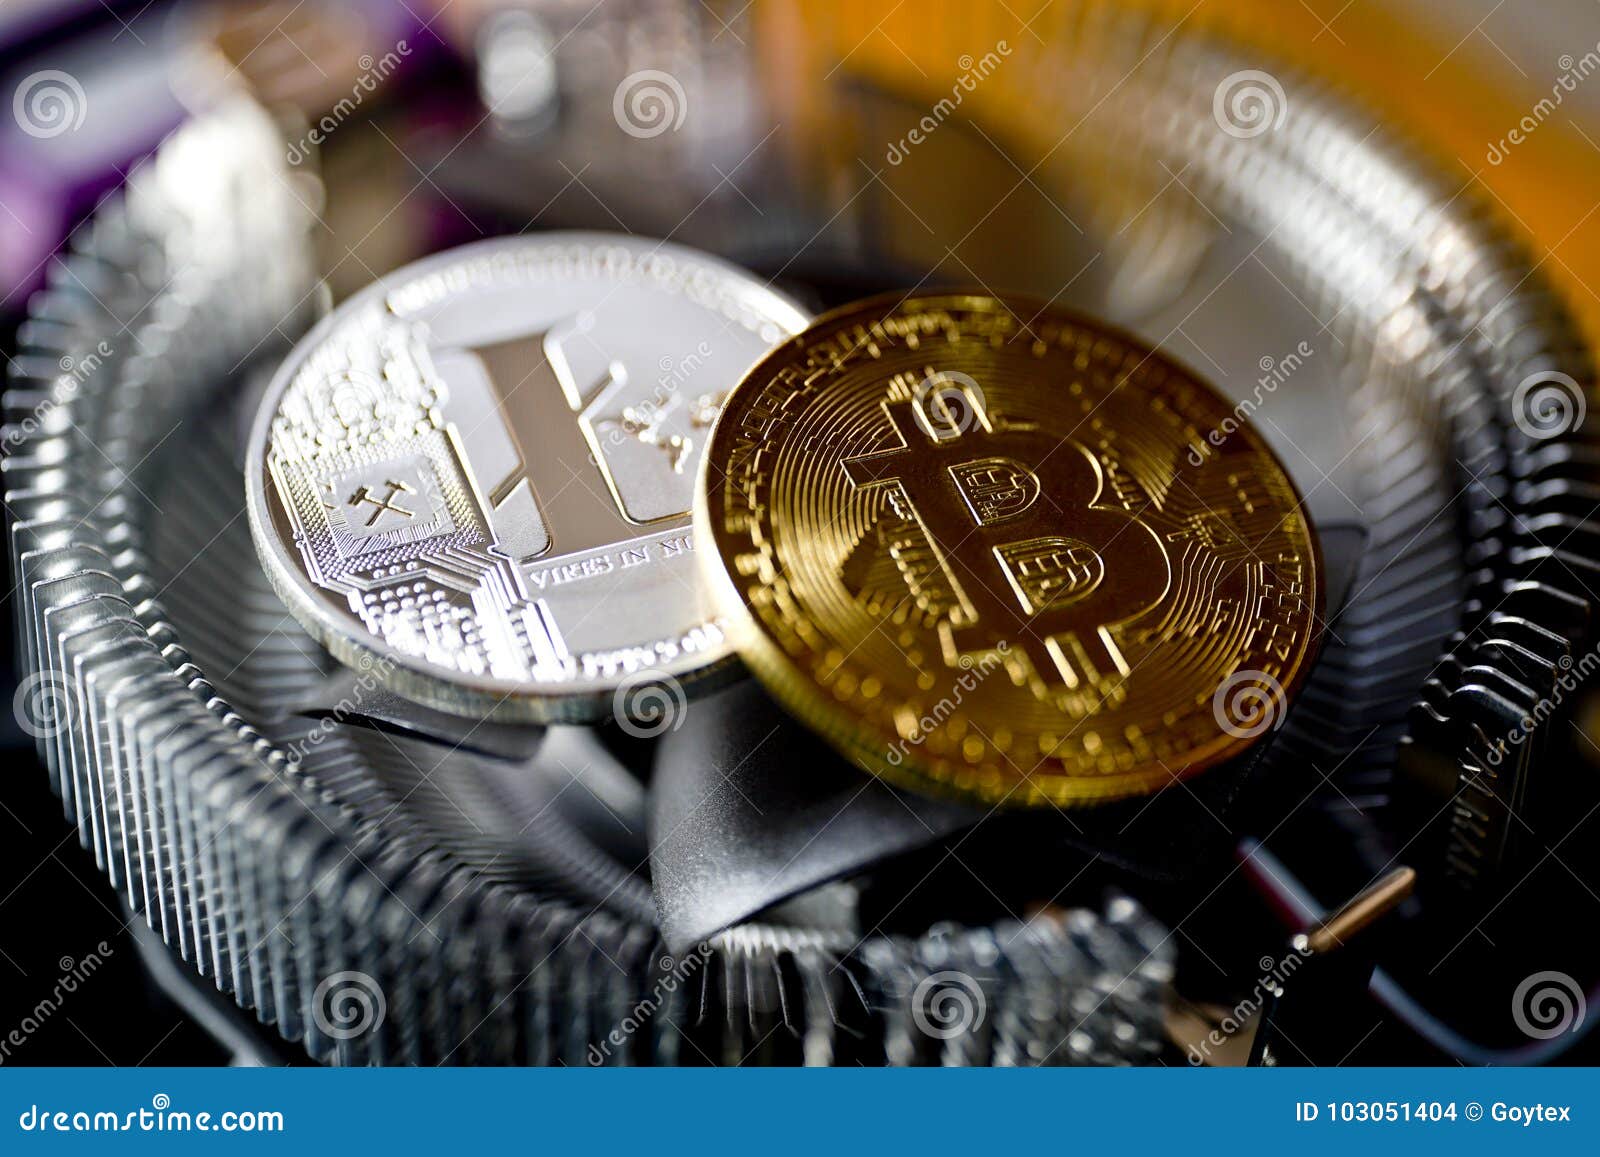 Litecoins coin stock photo. Image of decred, demand - 103051404